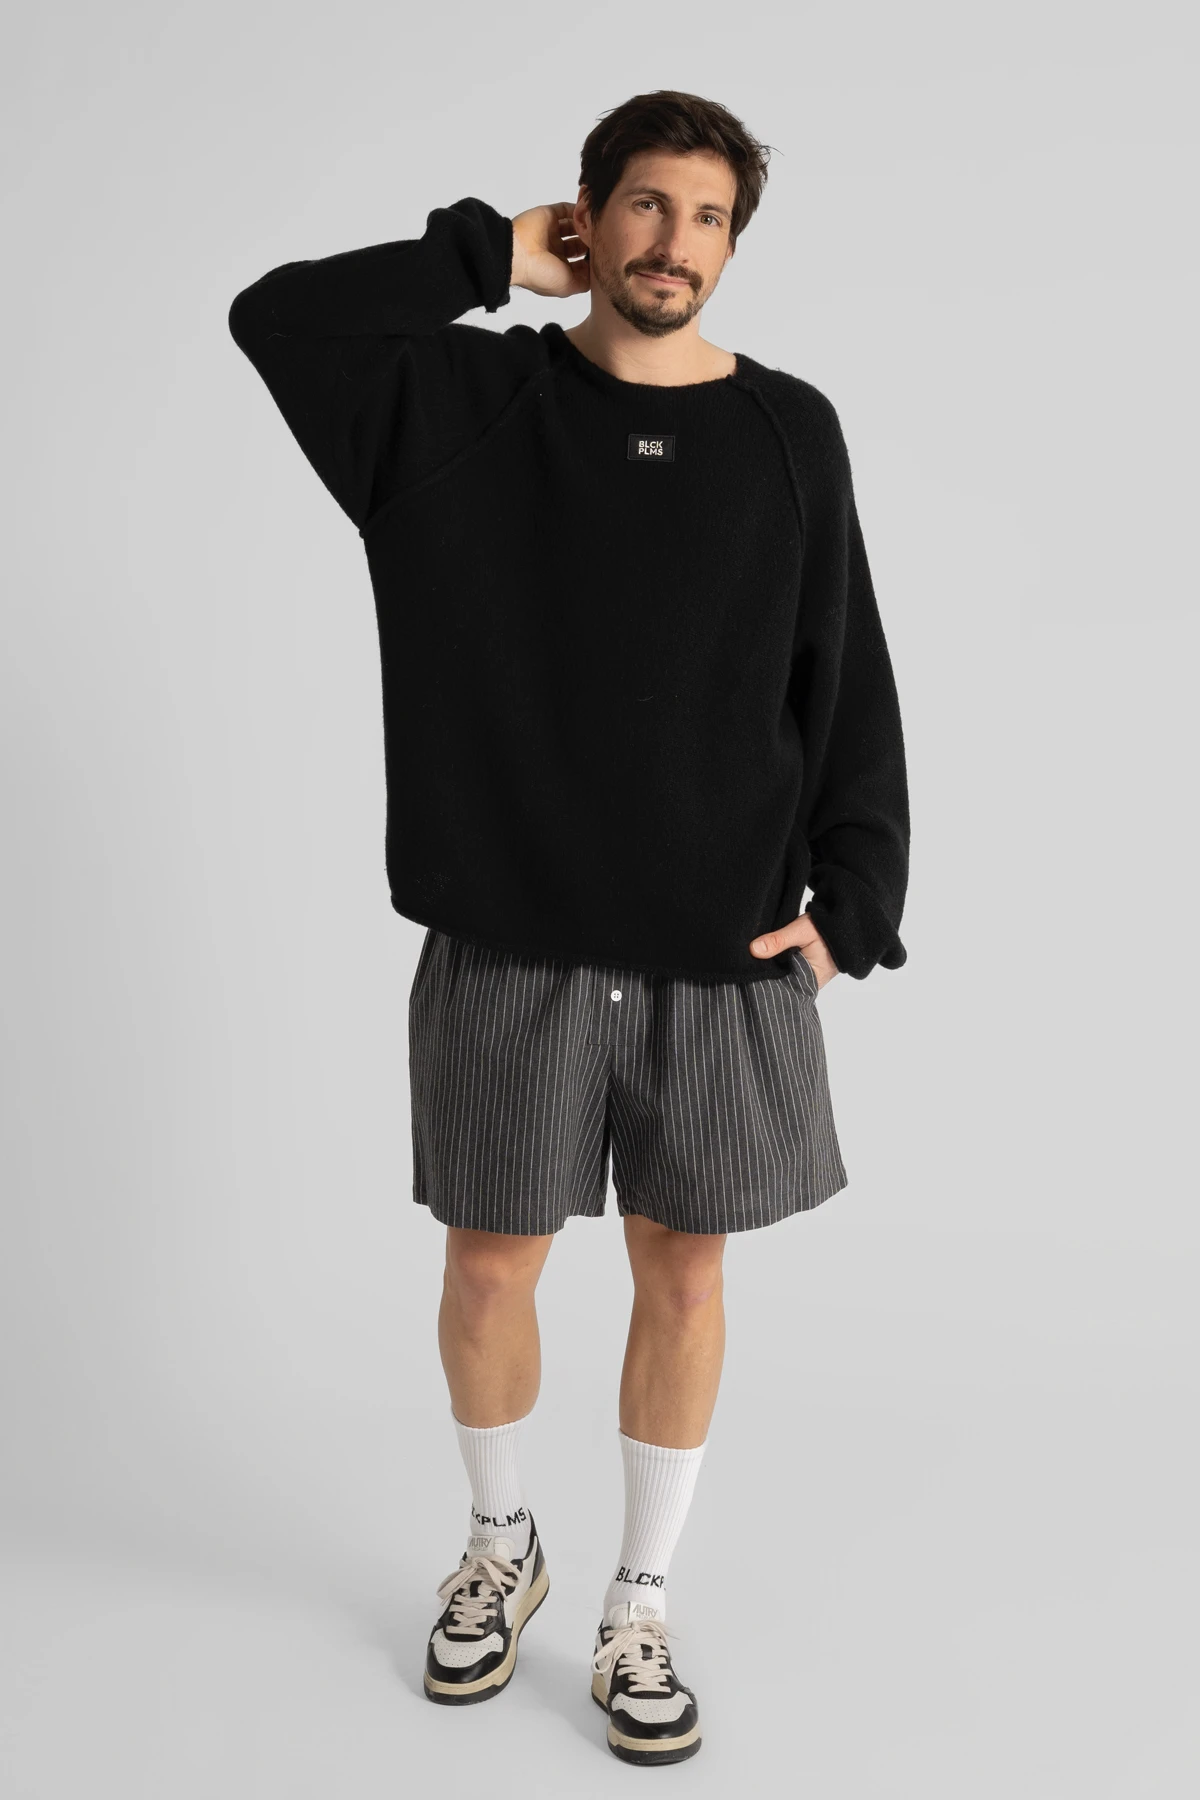 MAEXIN Sweater Black